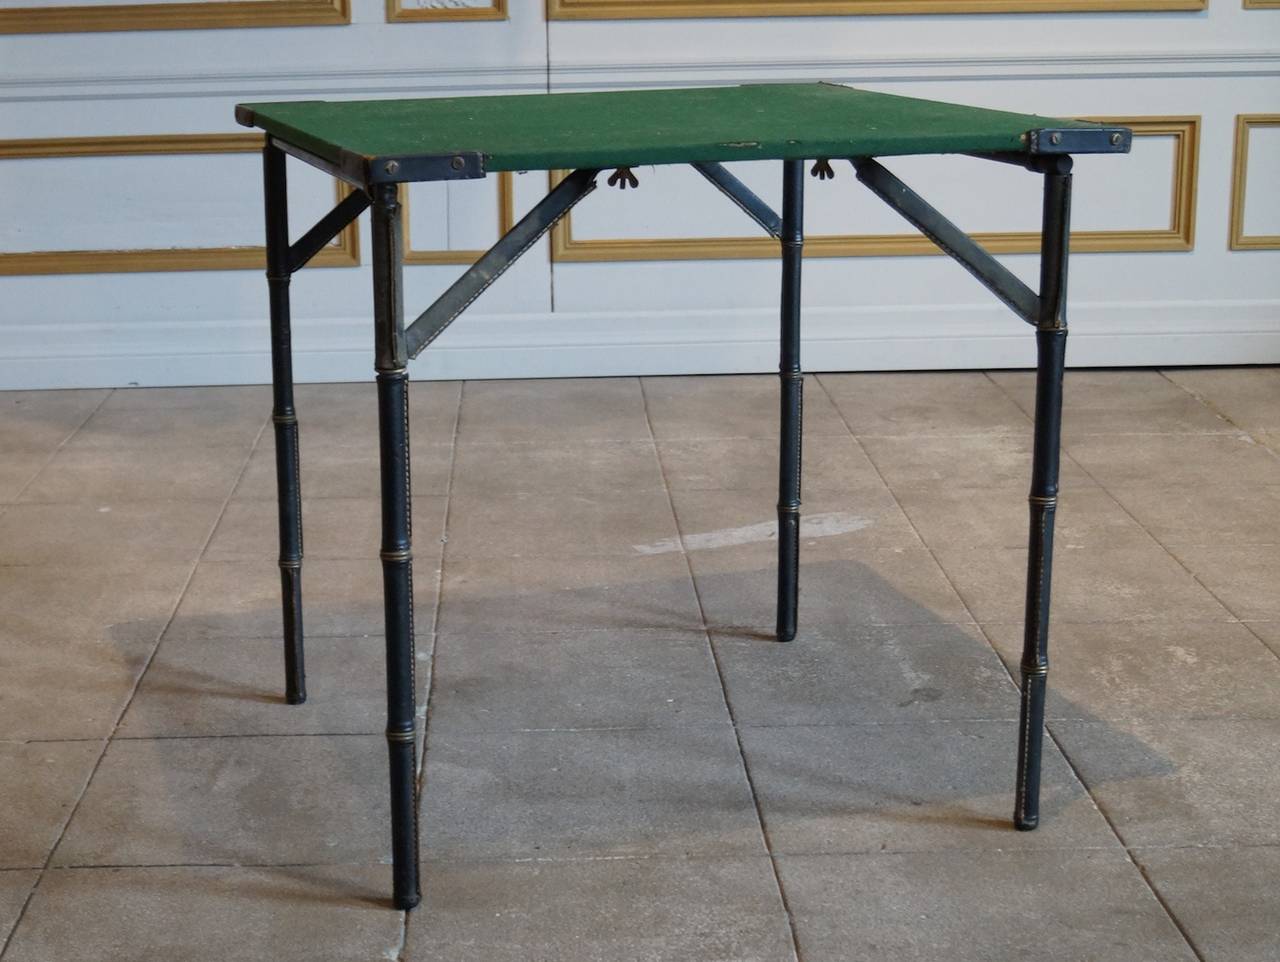 Pure Classic Jacques Adnet game or card table in hand-stitched leather with felt top. French architect Jacques Adnet (1900-1984) worked for Maurice Dufrêne before establishing himself as a successful designer, operating in an elegant but